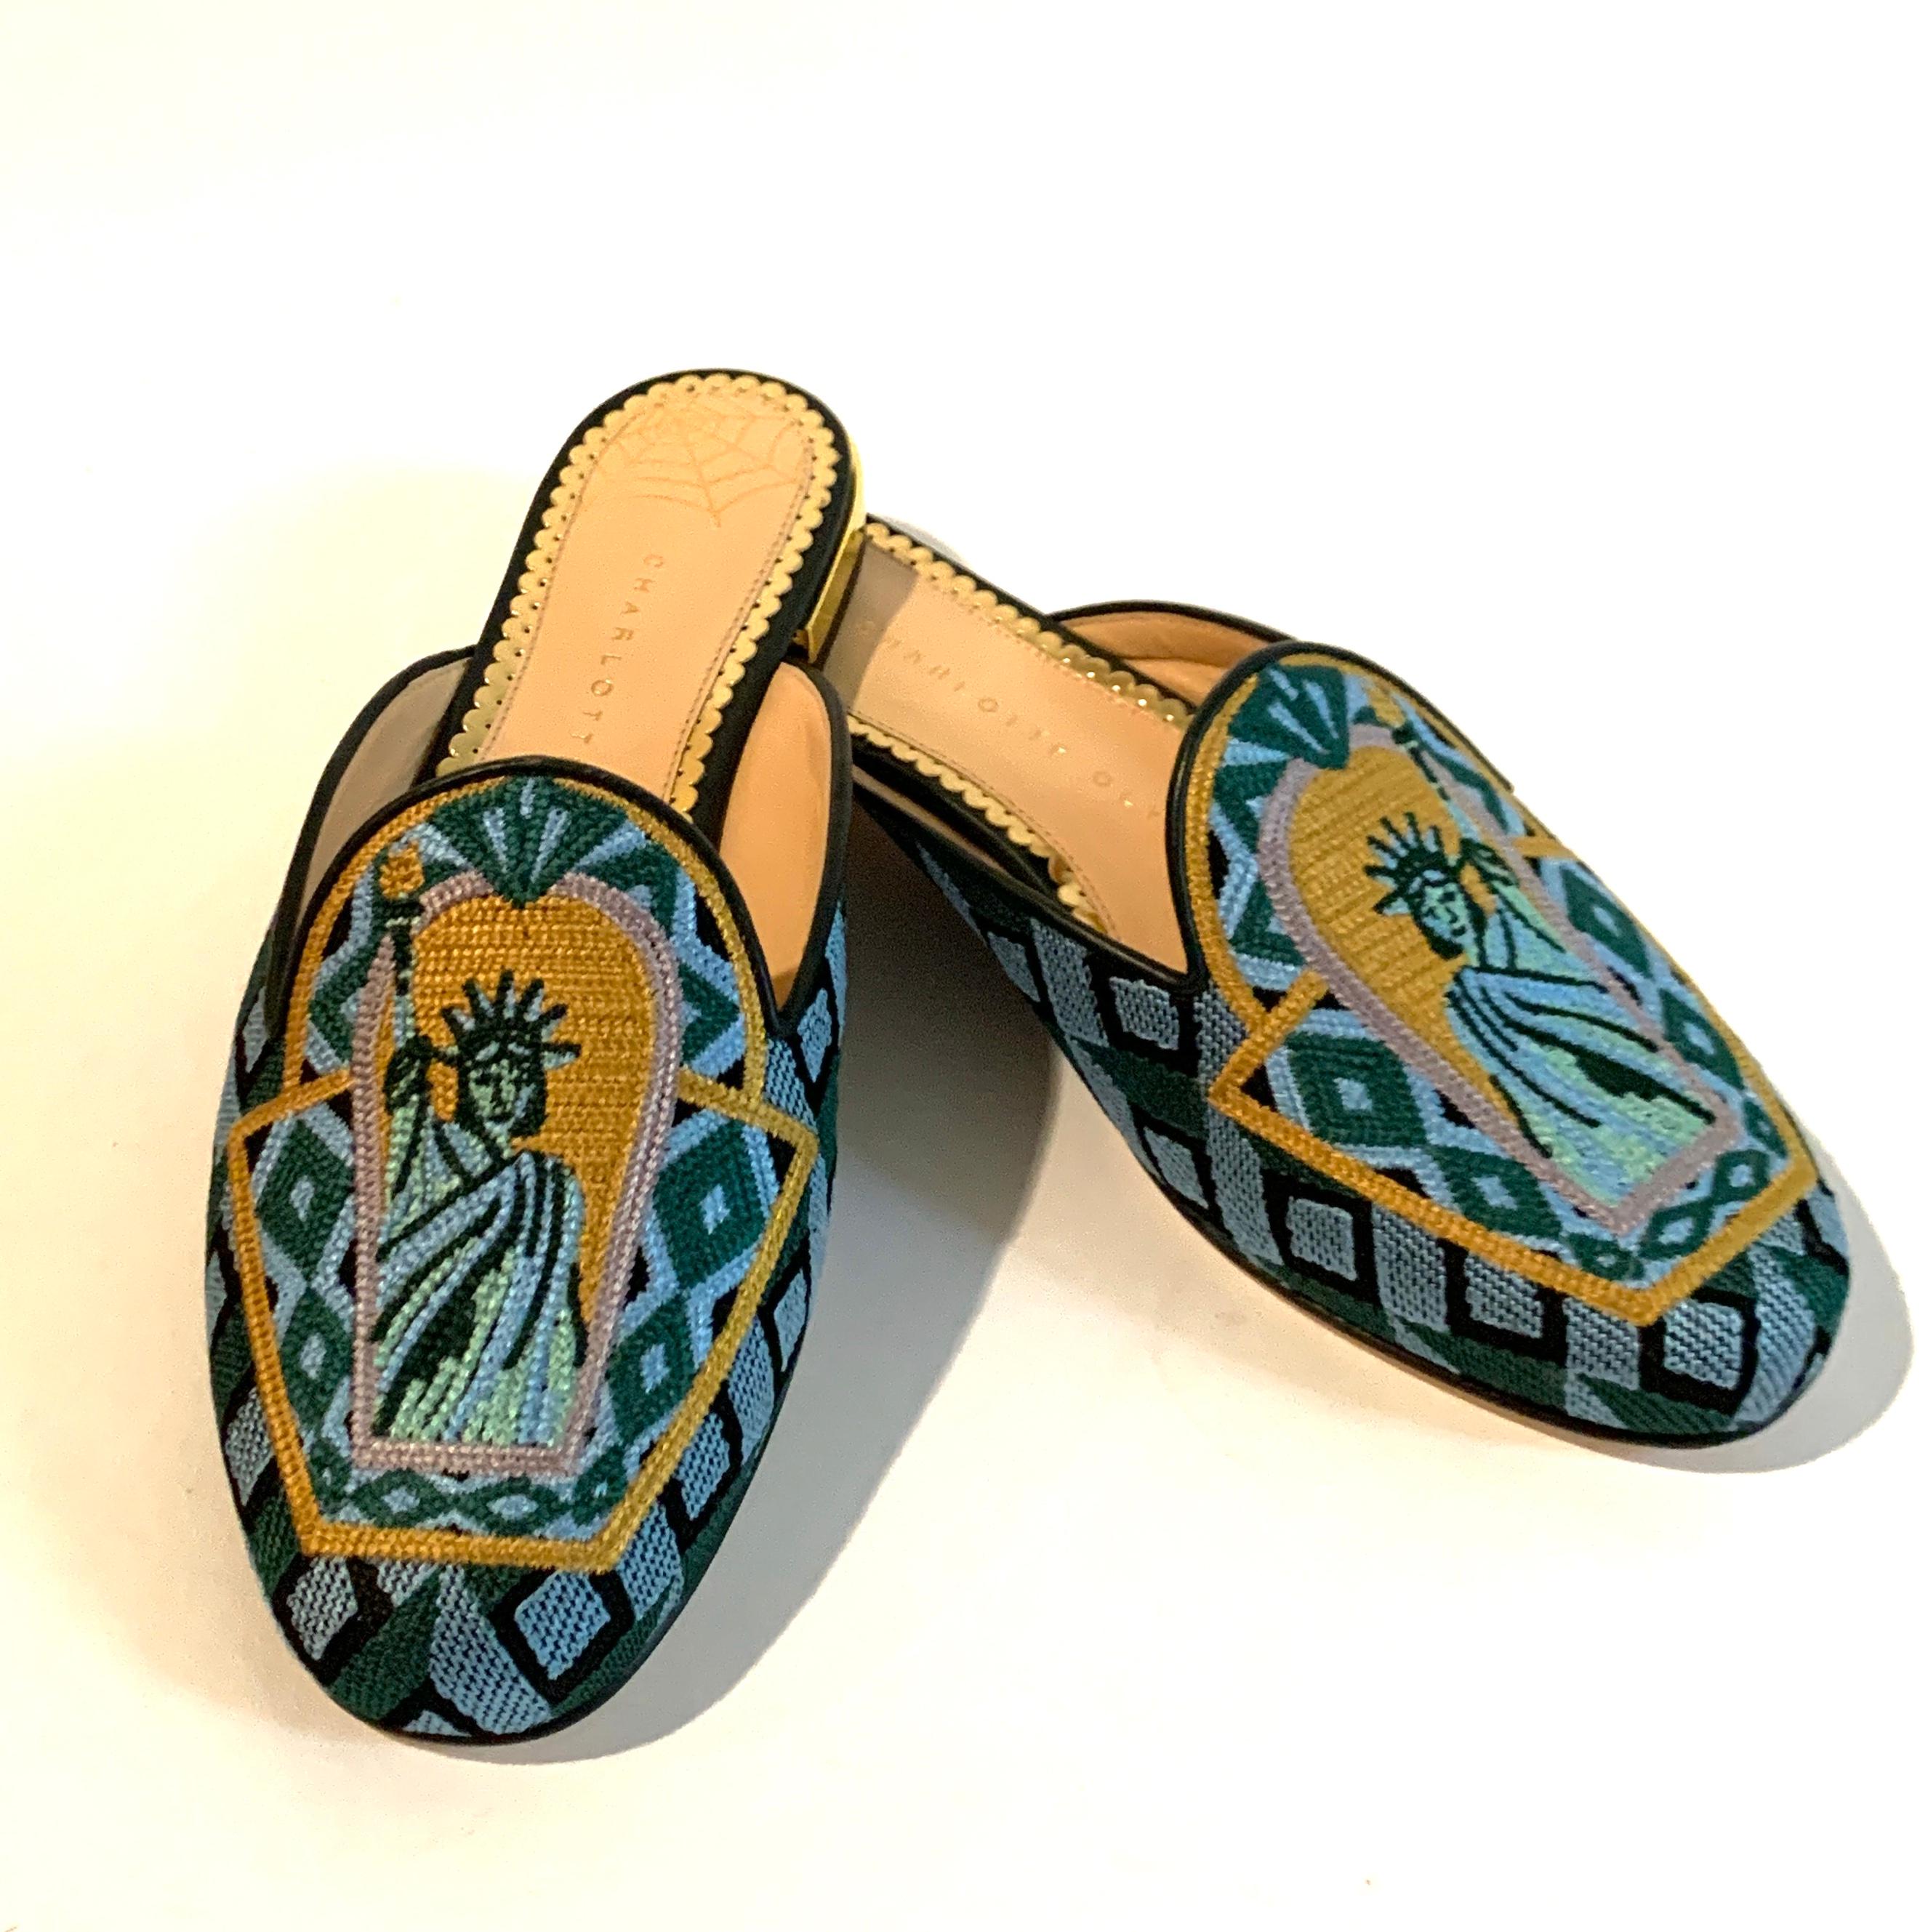 Charlotte Olympia Lady Liberty mule features the Statue of Liberty in embroidered needlepoint at upper. Gold tone heel. Canvas slide with leather soles. Slide on. 

Made in Italy.

Size IT 35, approximate US 5.

Excellent unworn condition. Box and